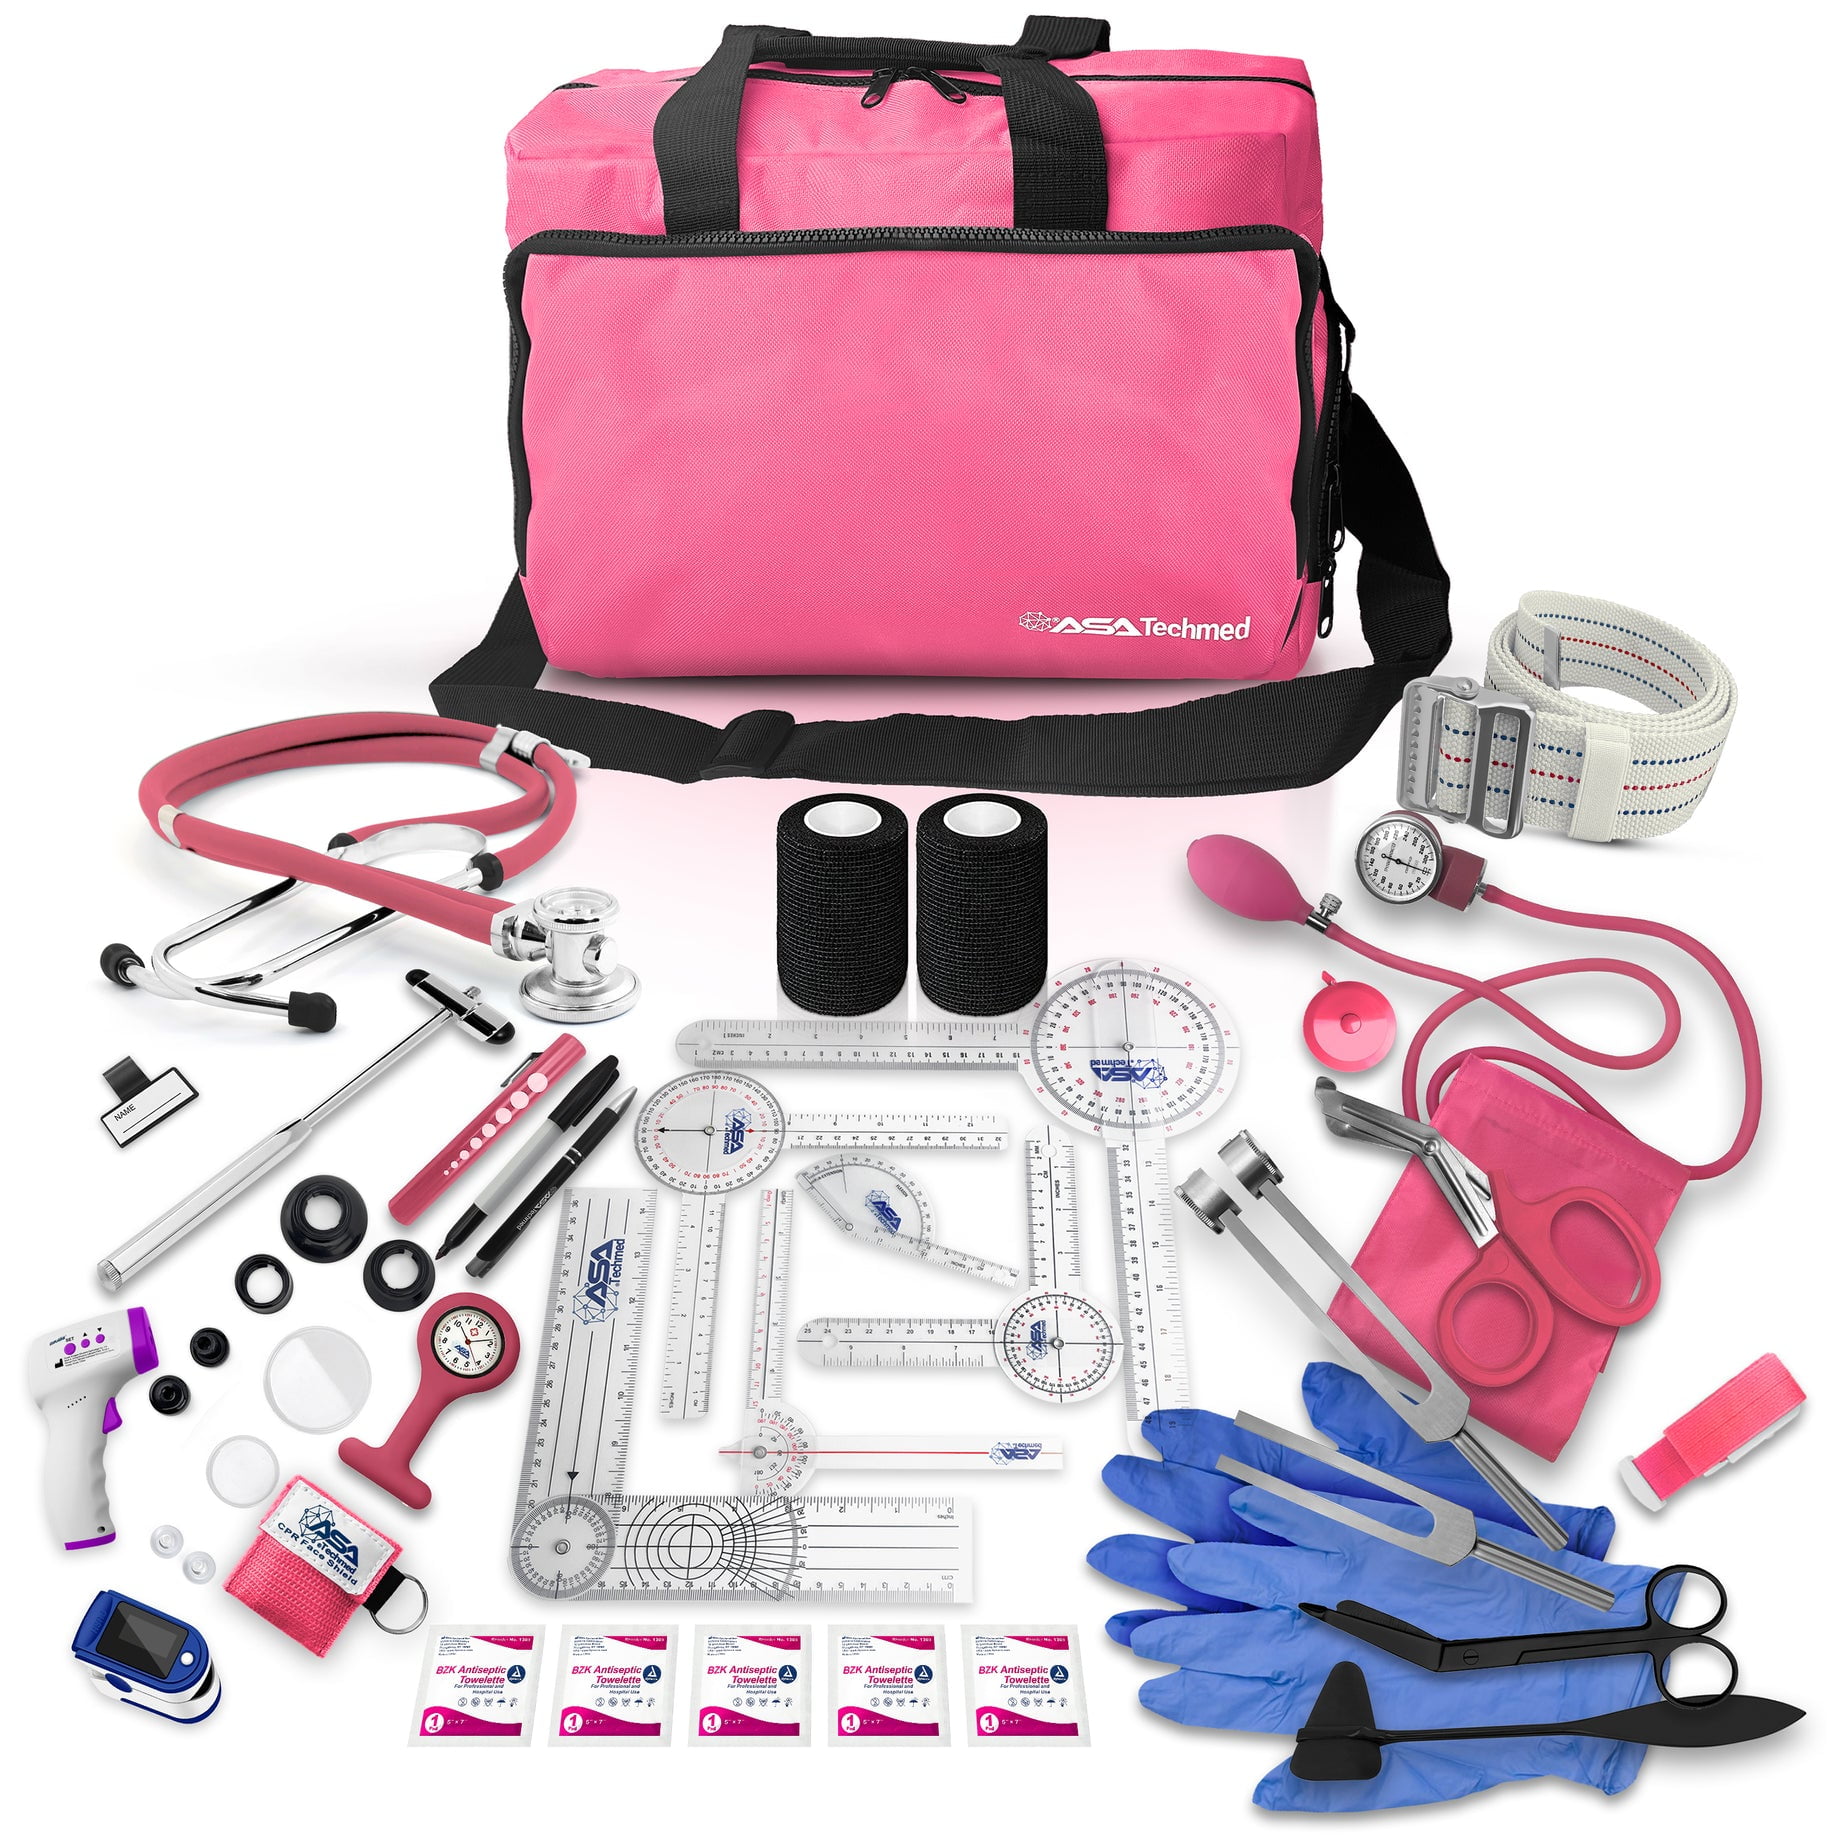 Physical Therapy Home Health Aide Kit with Home Health Call Bag - for  Nurses, Home Health Aides, Physical Therapy, Patient Care 